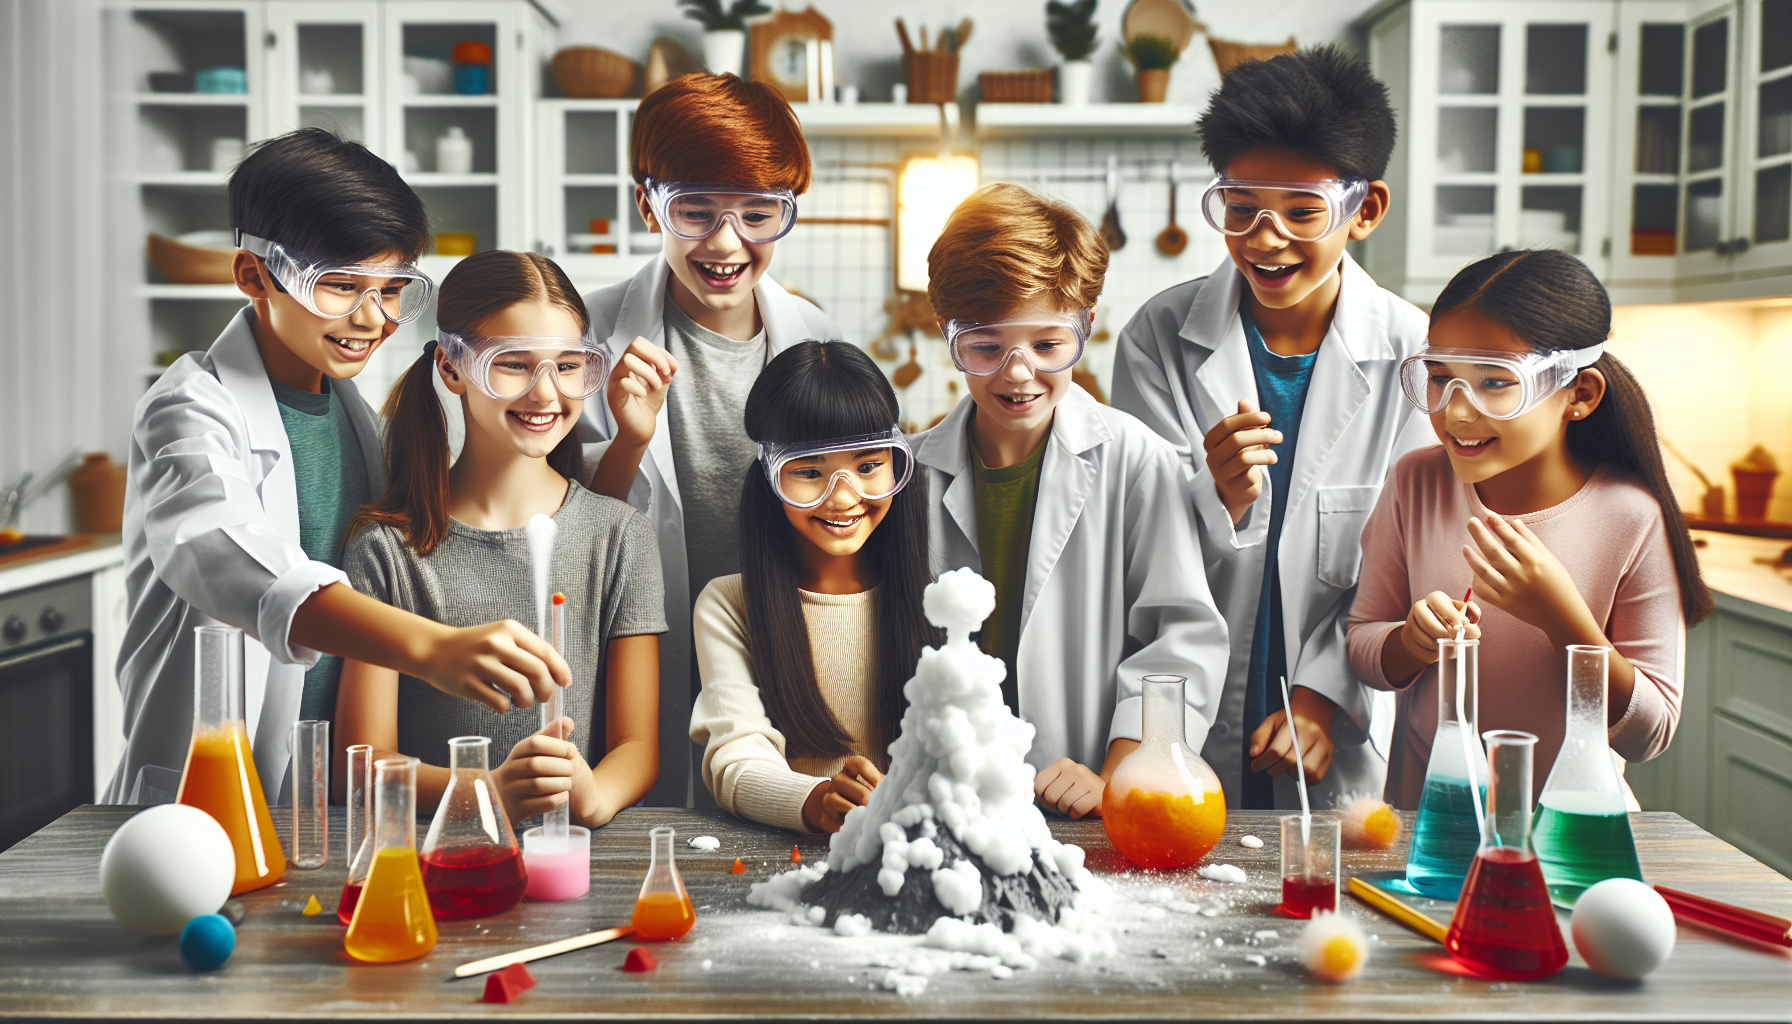 Cheerful children of diverse ethnicities wearing safety goggles and lab coats, conducting colorful science experiments in a bright, cluttered home kitchen. They are observing a homemade volcano eruption experiment with baking soda and vinegar, while bubbles and smoke float around them, illustrating a fun and educational atmosphere.